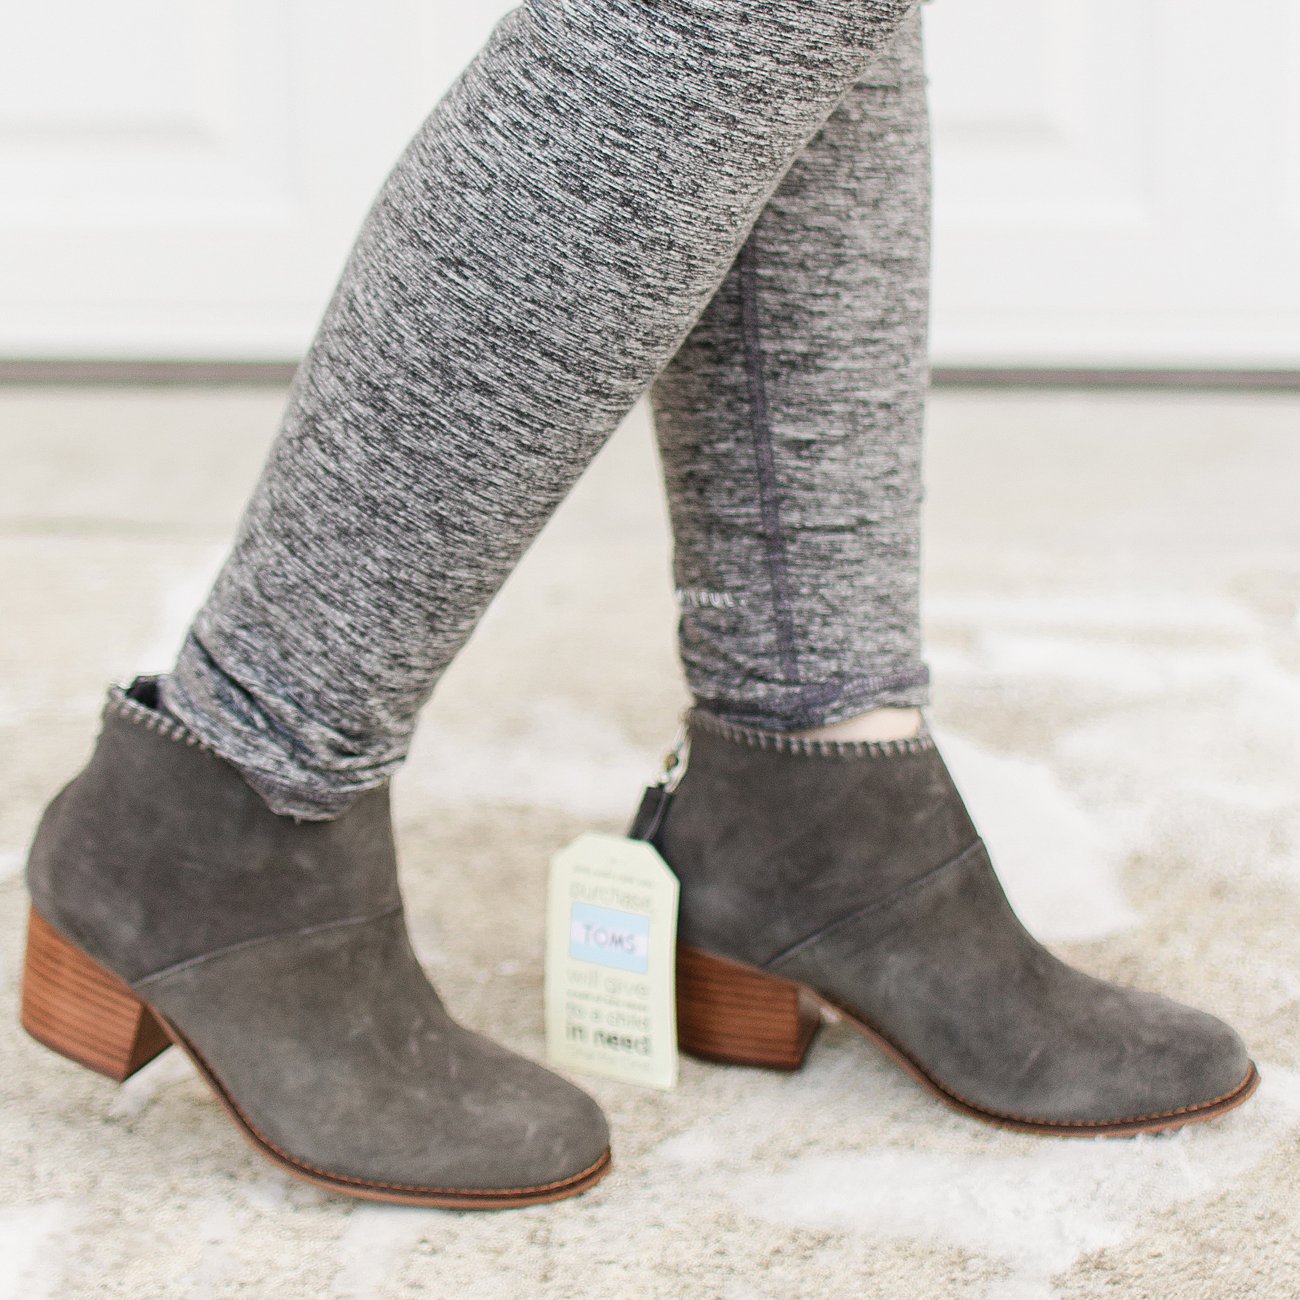 Stitch Fix Review TOMS - Leila Suede Bootie - SIZE: 8 - $119 - My 50th Fix & 5 Tips for Developing a Relationship with Your Stitch Fix Stylist by popular North Carolina ethical fashion blogger Still Being Molly